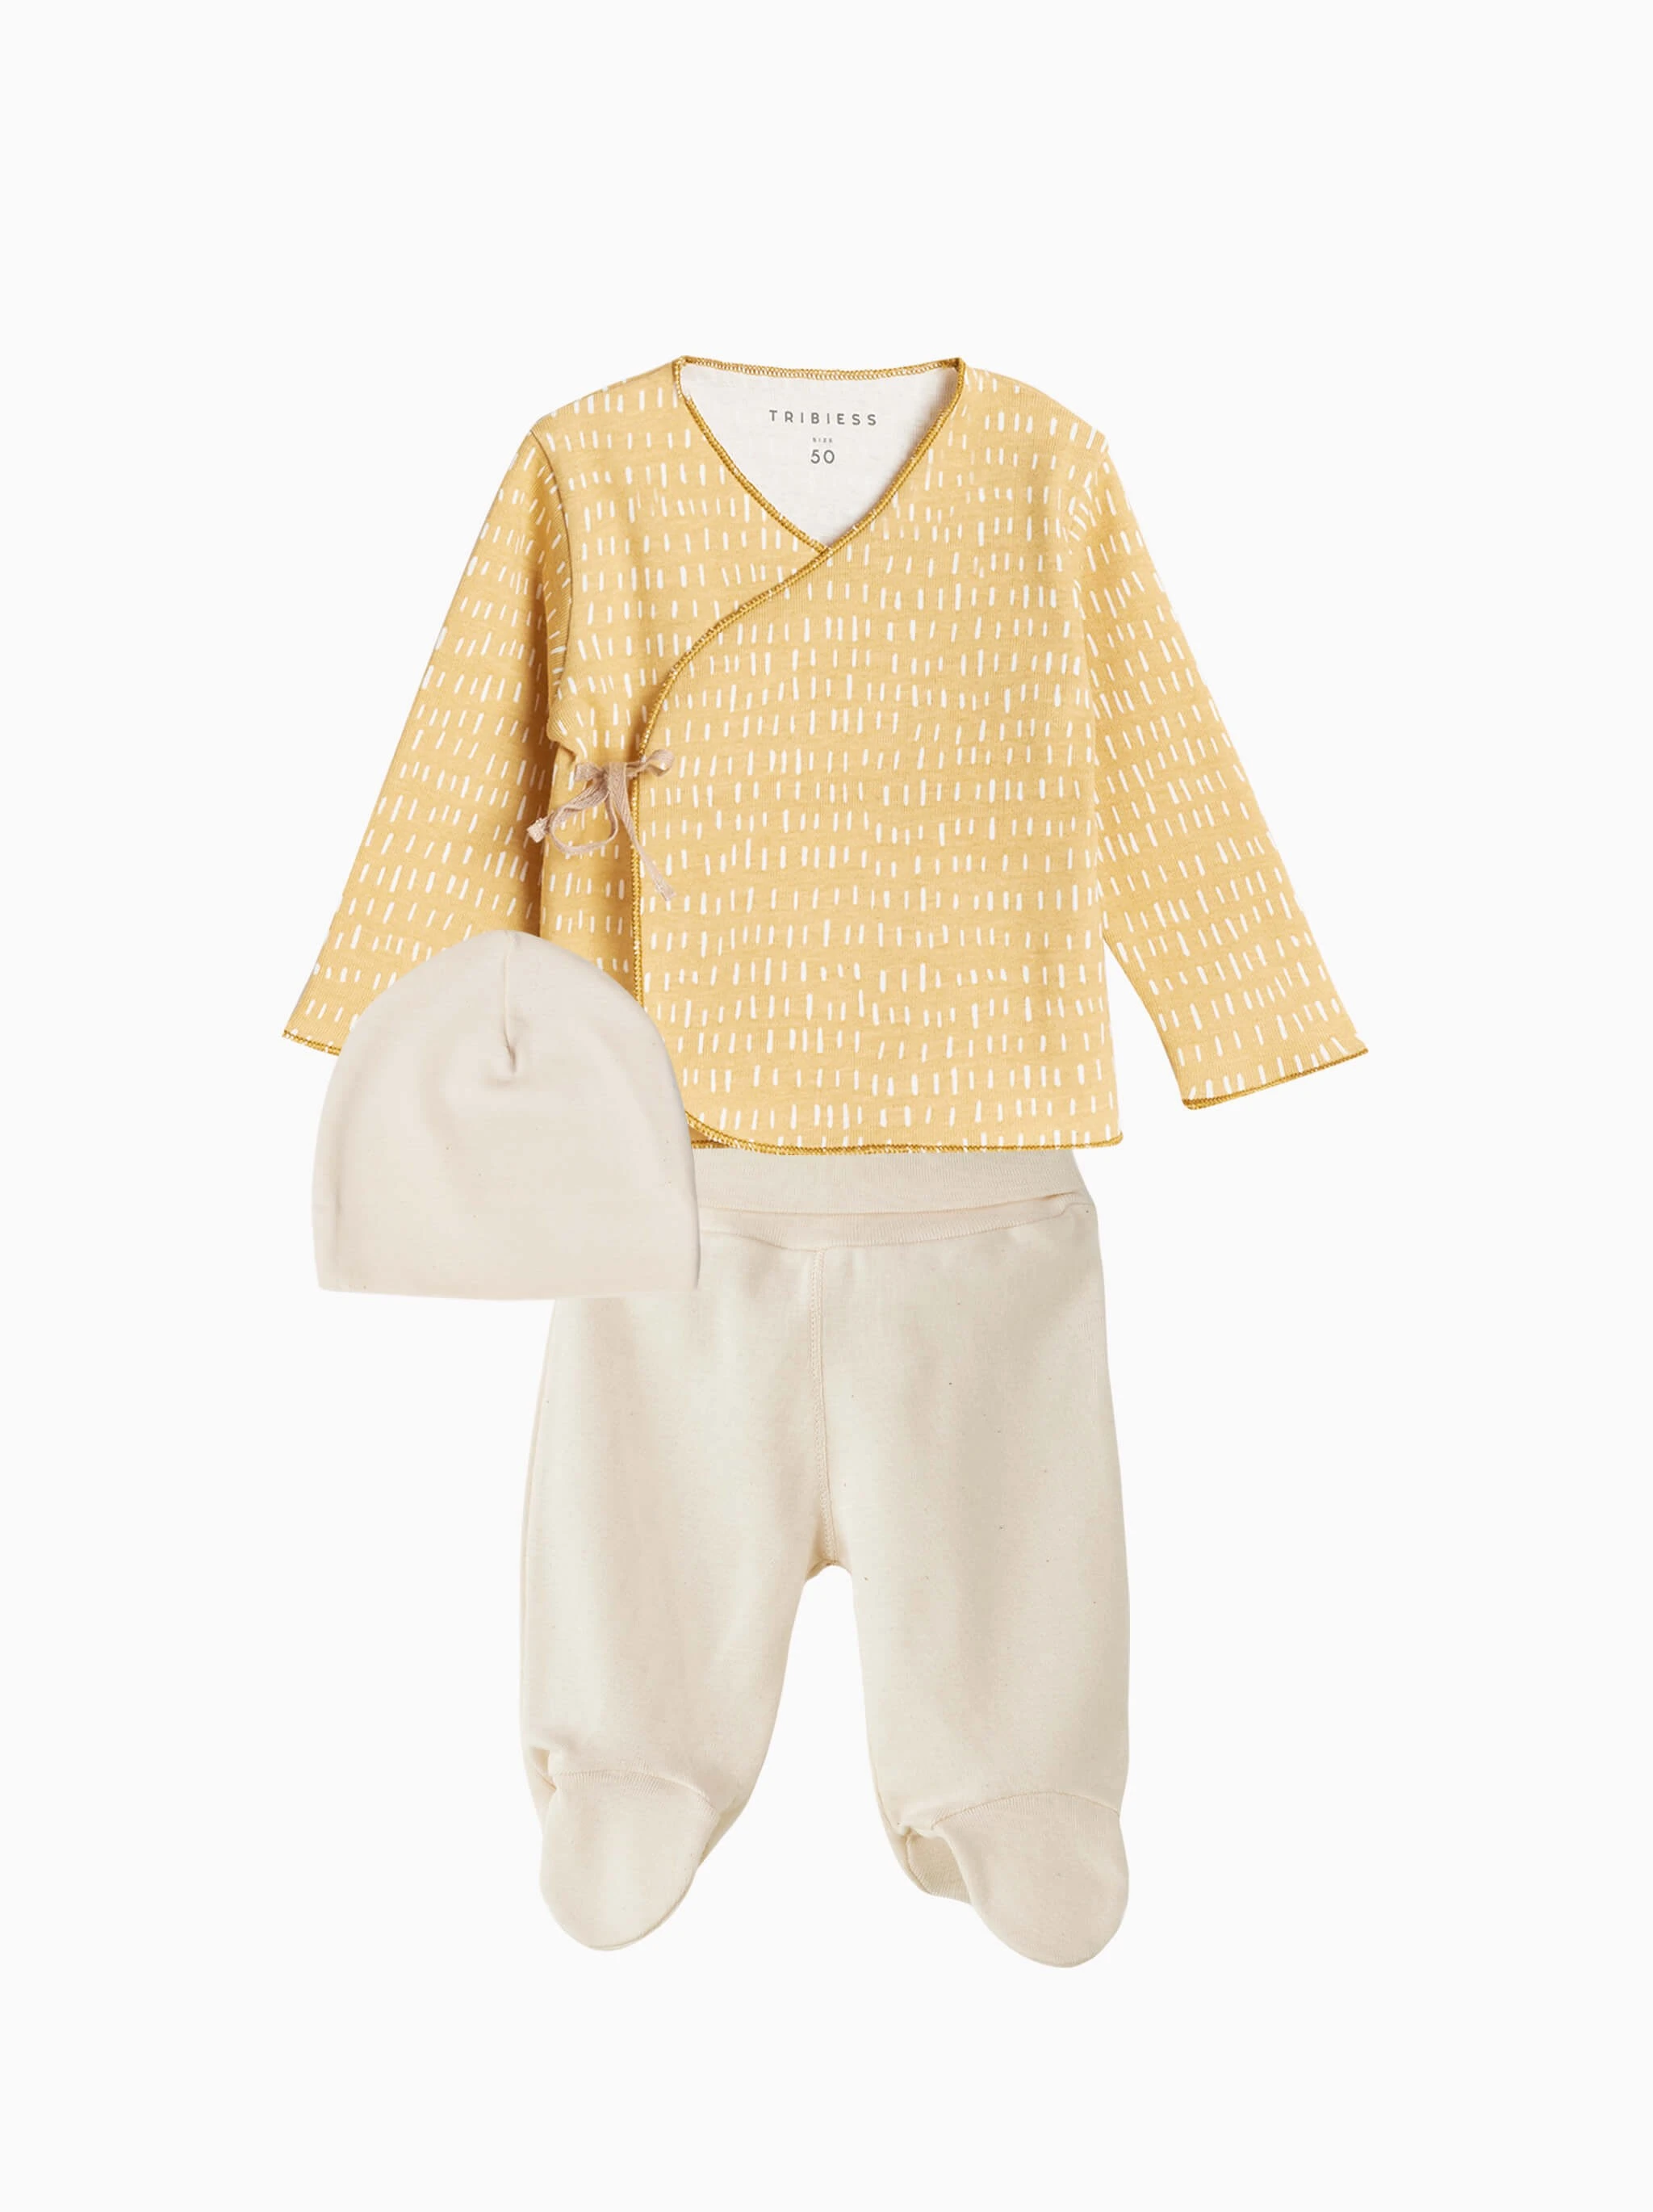 newborn first outfit · white strokes, unbleached